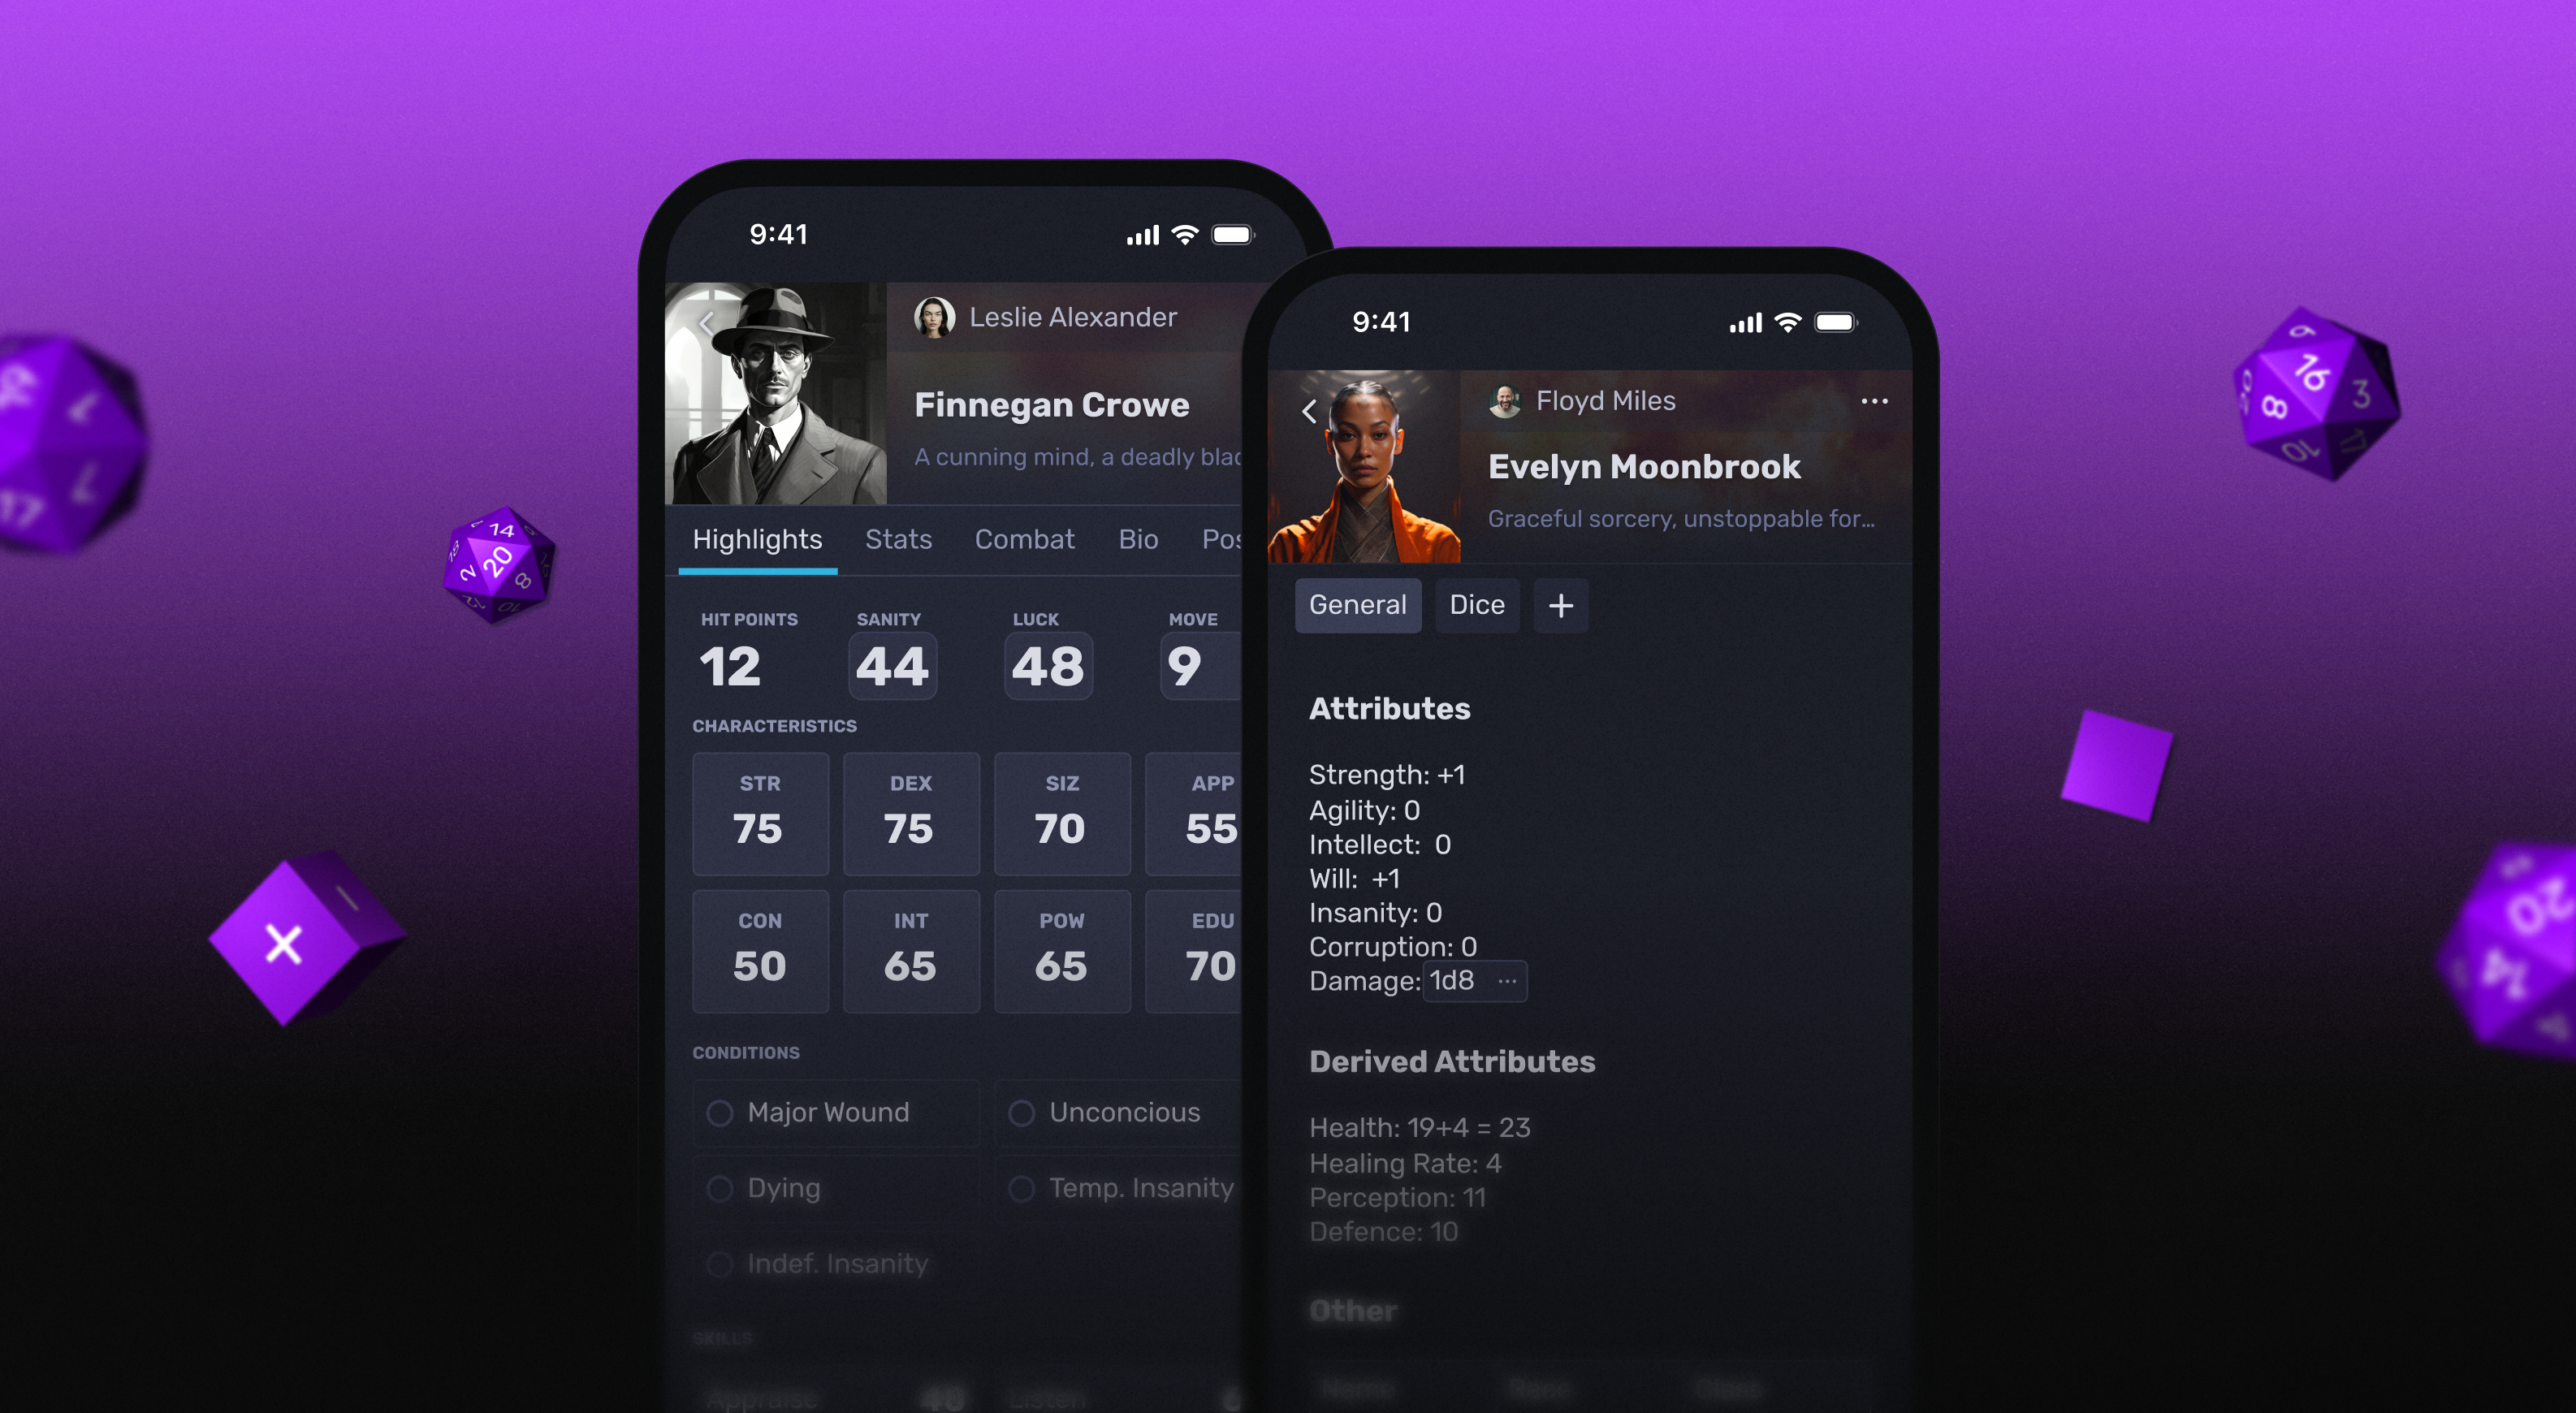 View and create tabletop role-playing characters on your mobile device with our iOS and Android apps.